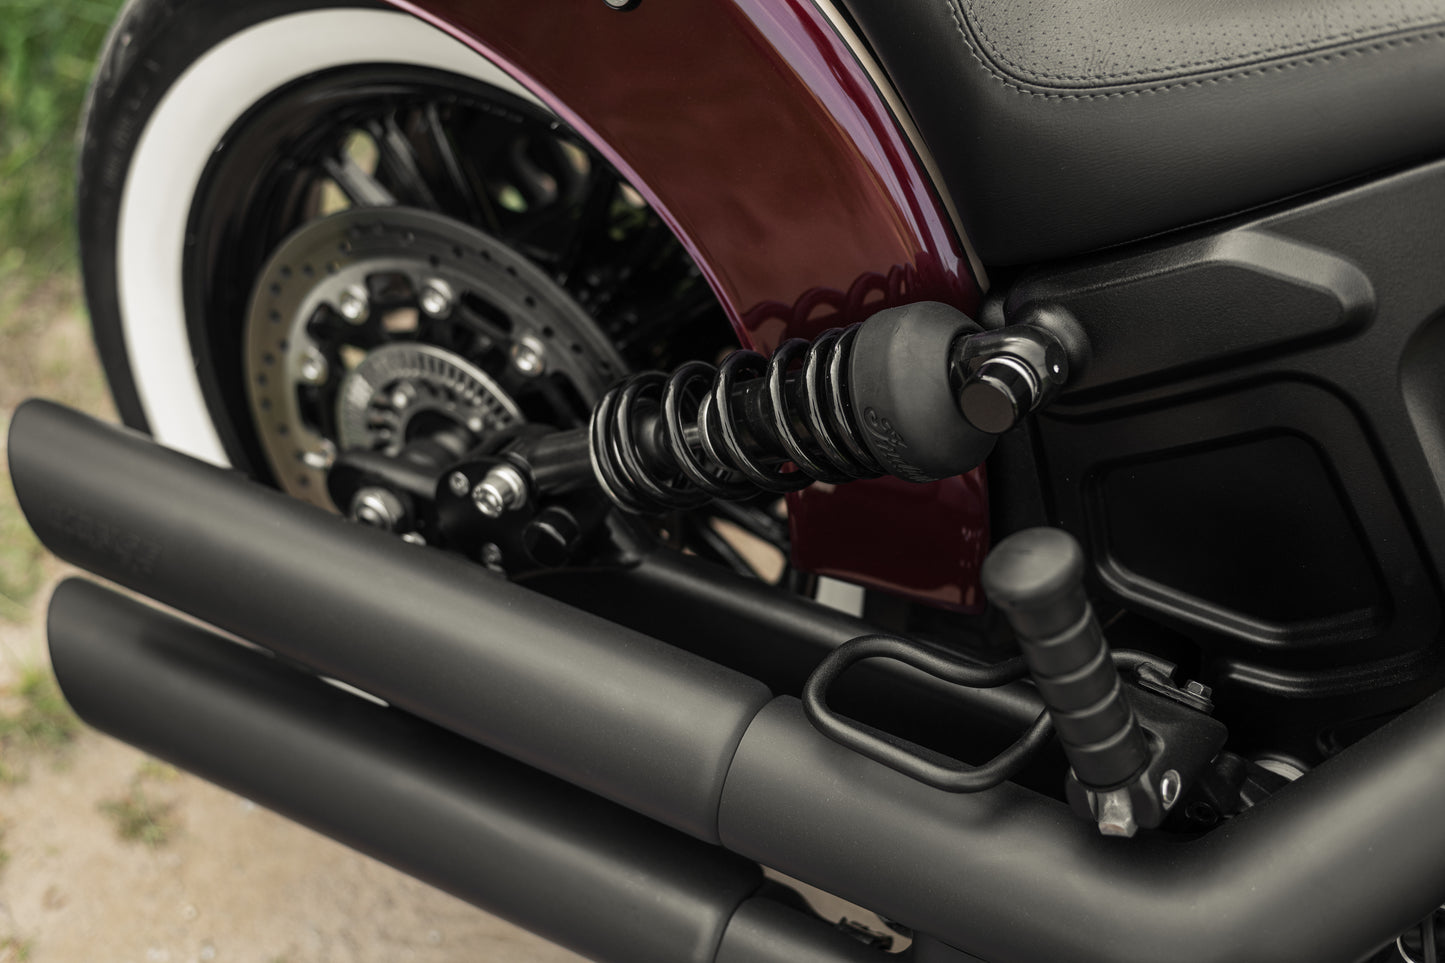 Zoomed Harley Davidson motorcycle with Killer Custom rear shock bolt covers